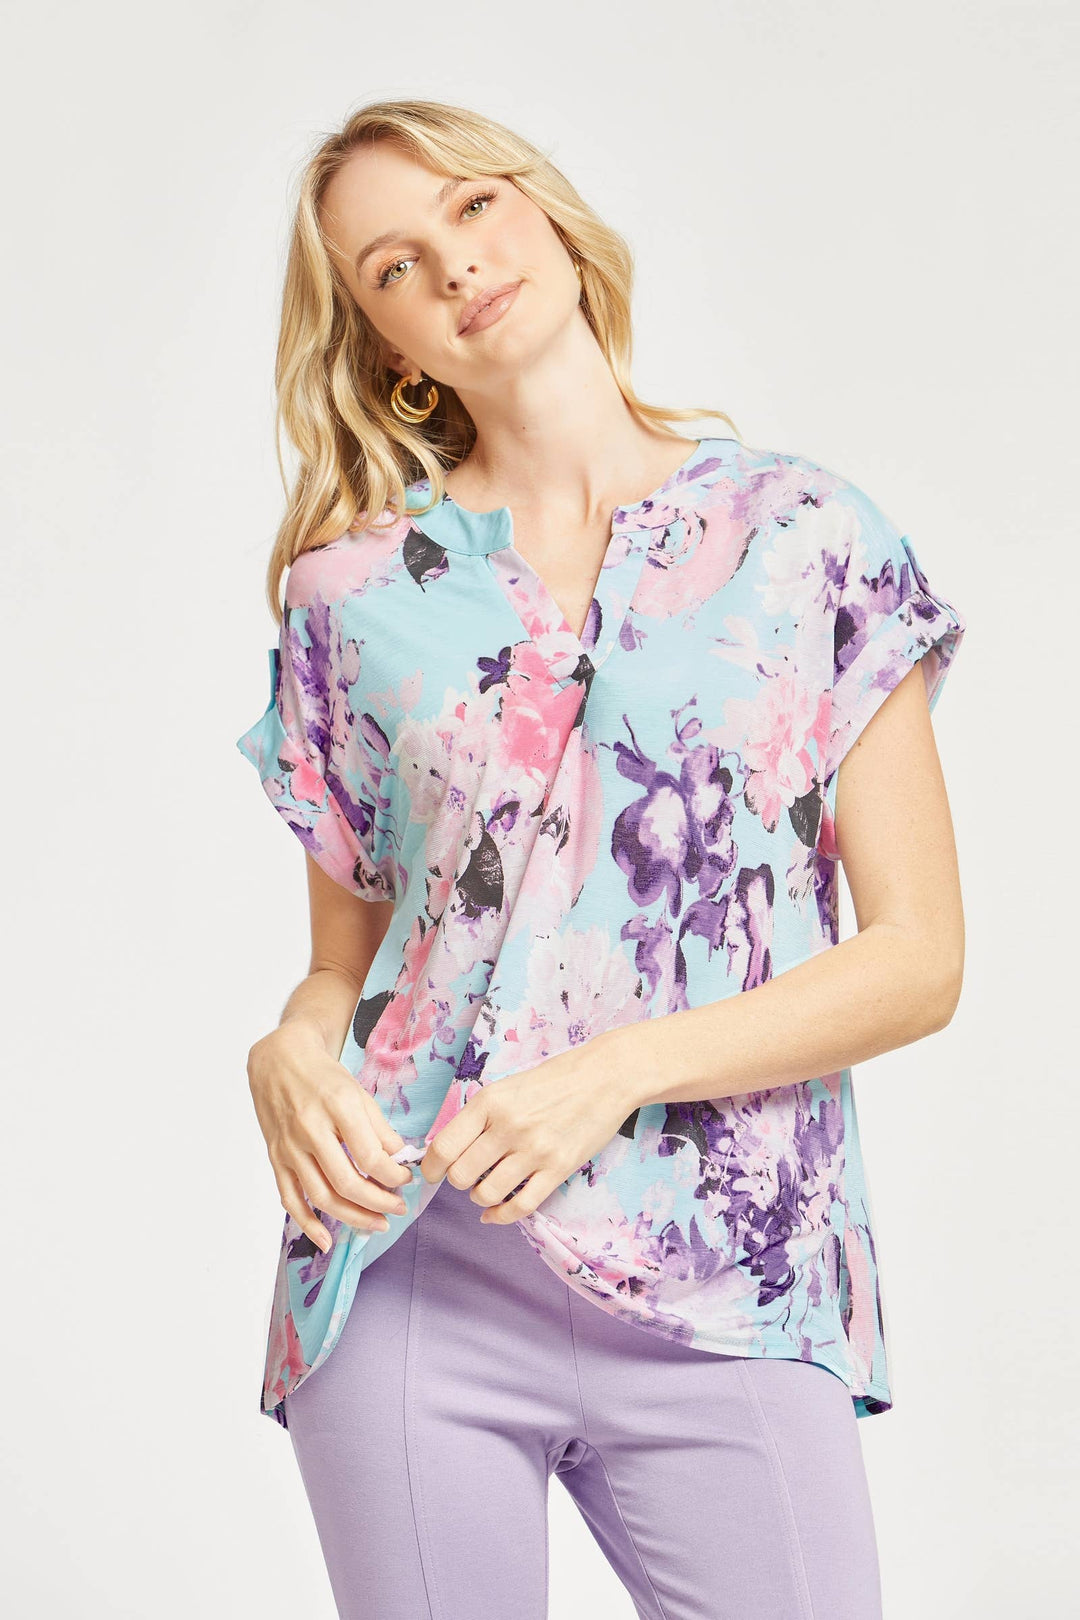 Lindzy Wrinkle Free Dolman Sleeve Top, Mint Lavender-Short Sleeve Tops-Inspired by Justeen-Women's Clothing Boutique in Chicago, Illinois